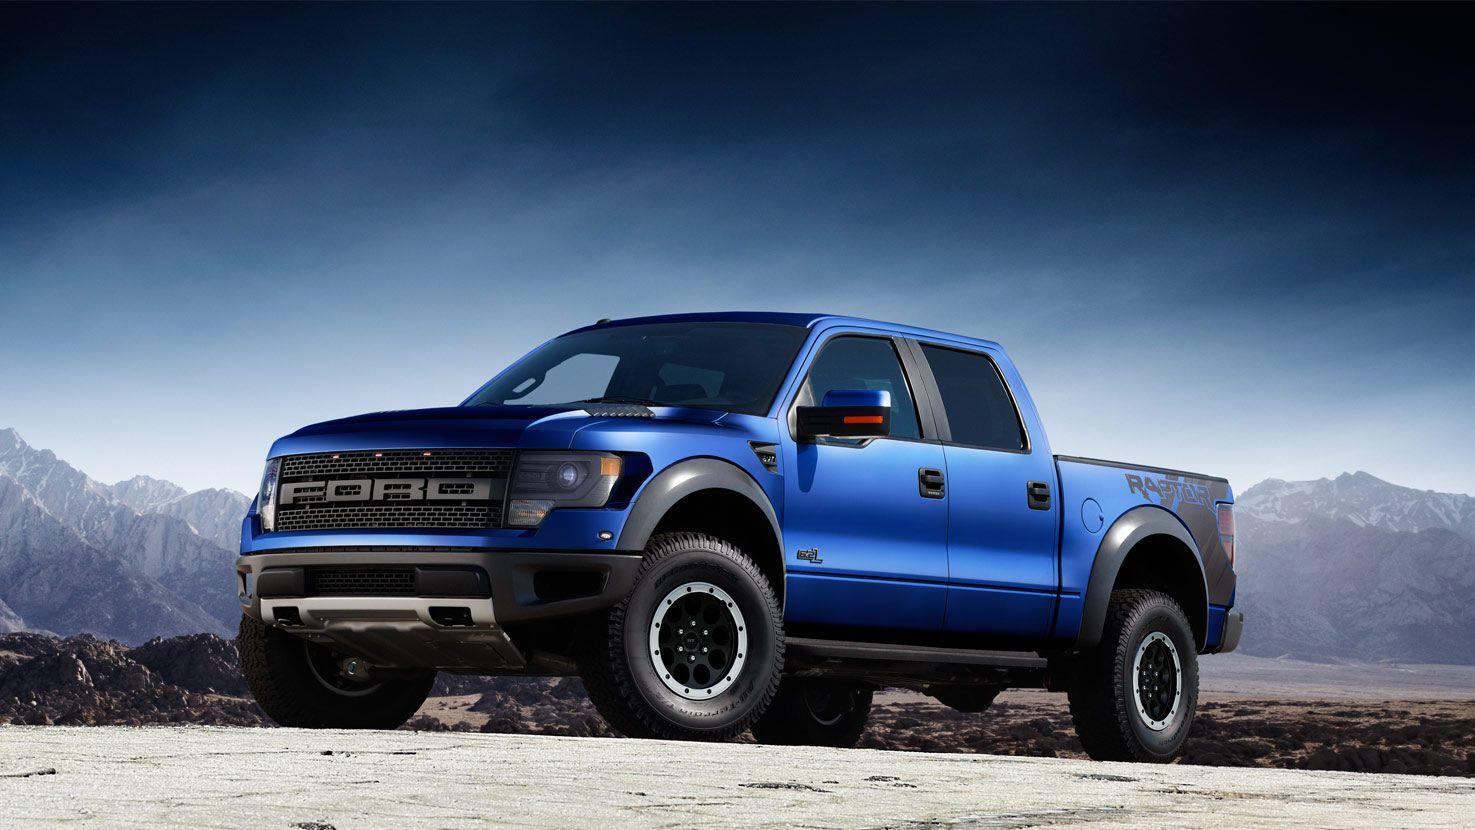  Ford  Truck  Wallpapers  Wallpaper  Cave